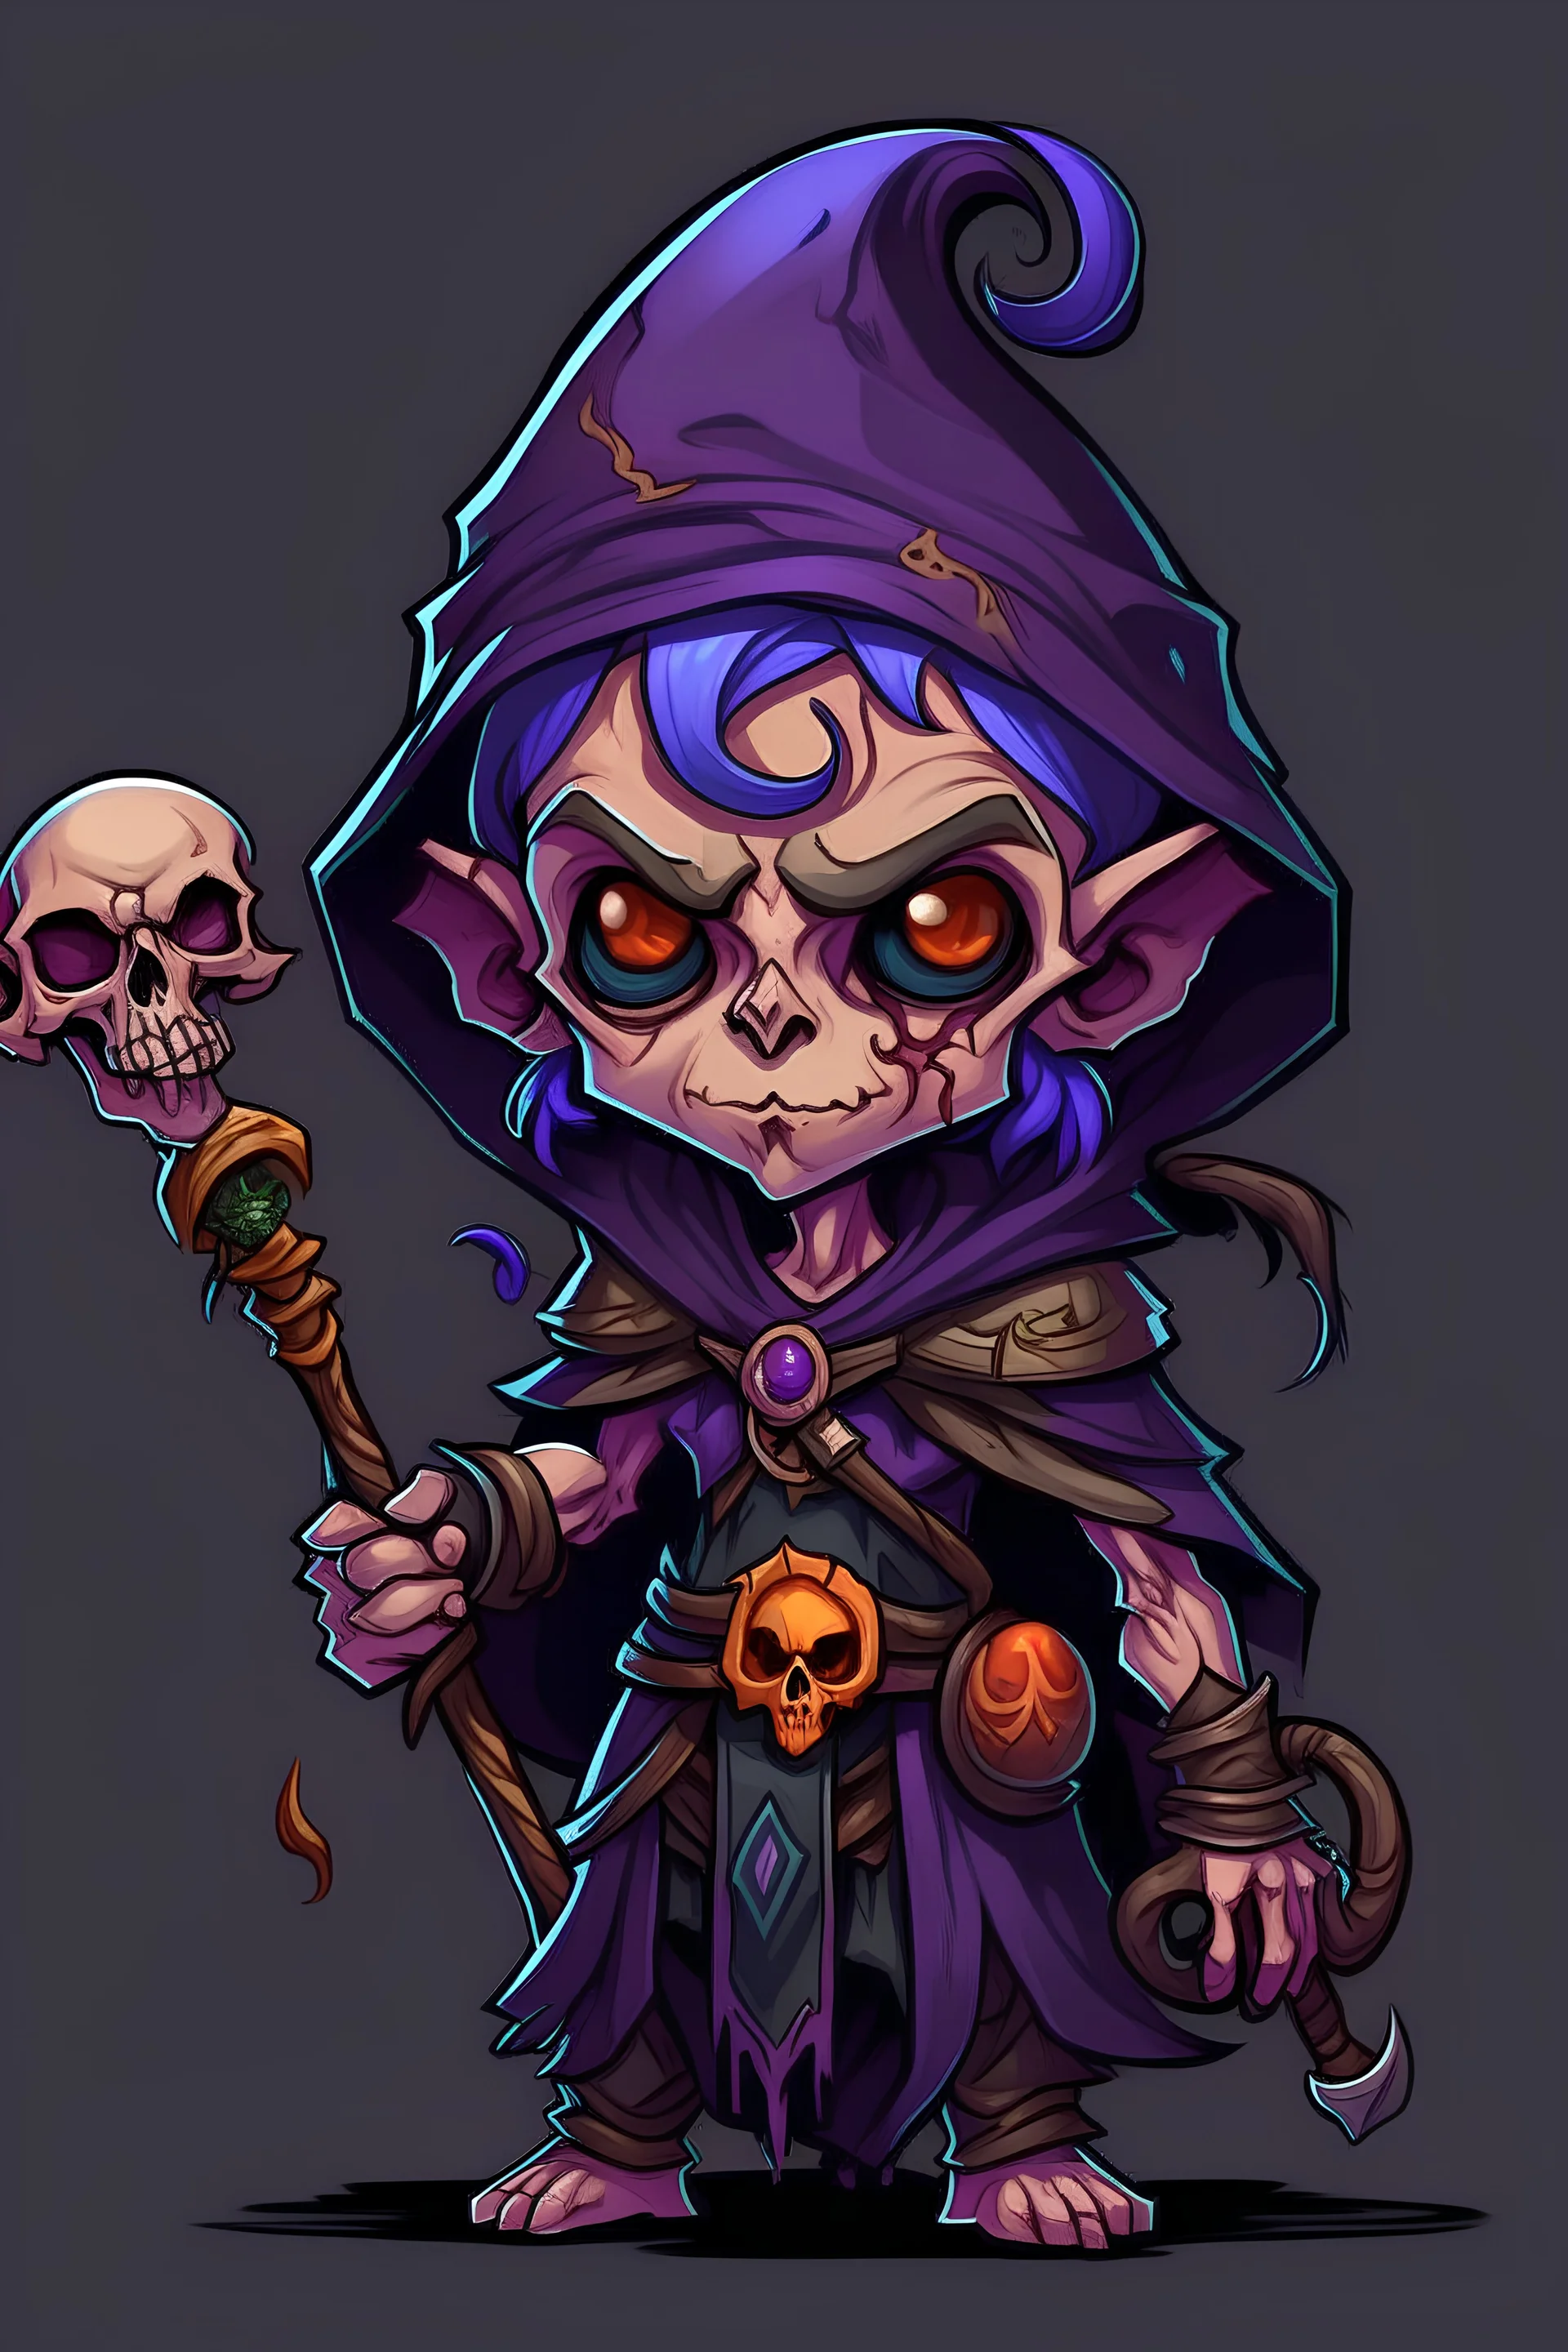 halfling female warlock holding a staff with a skull on top with purple eyes